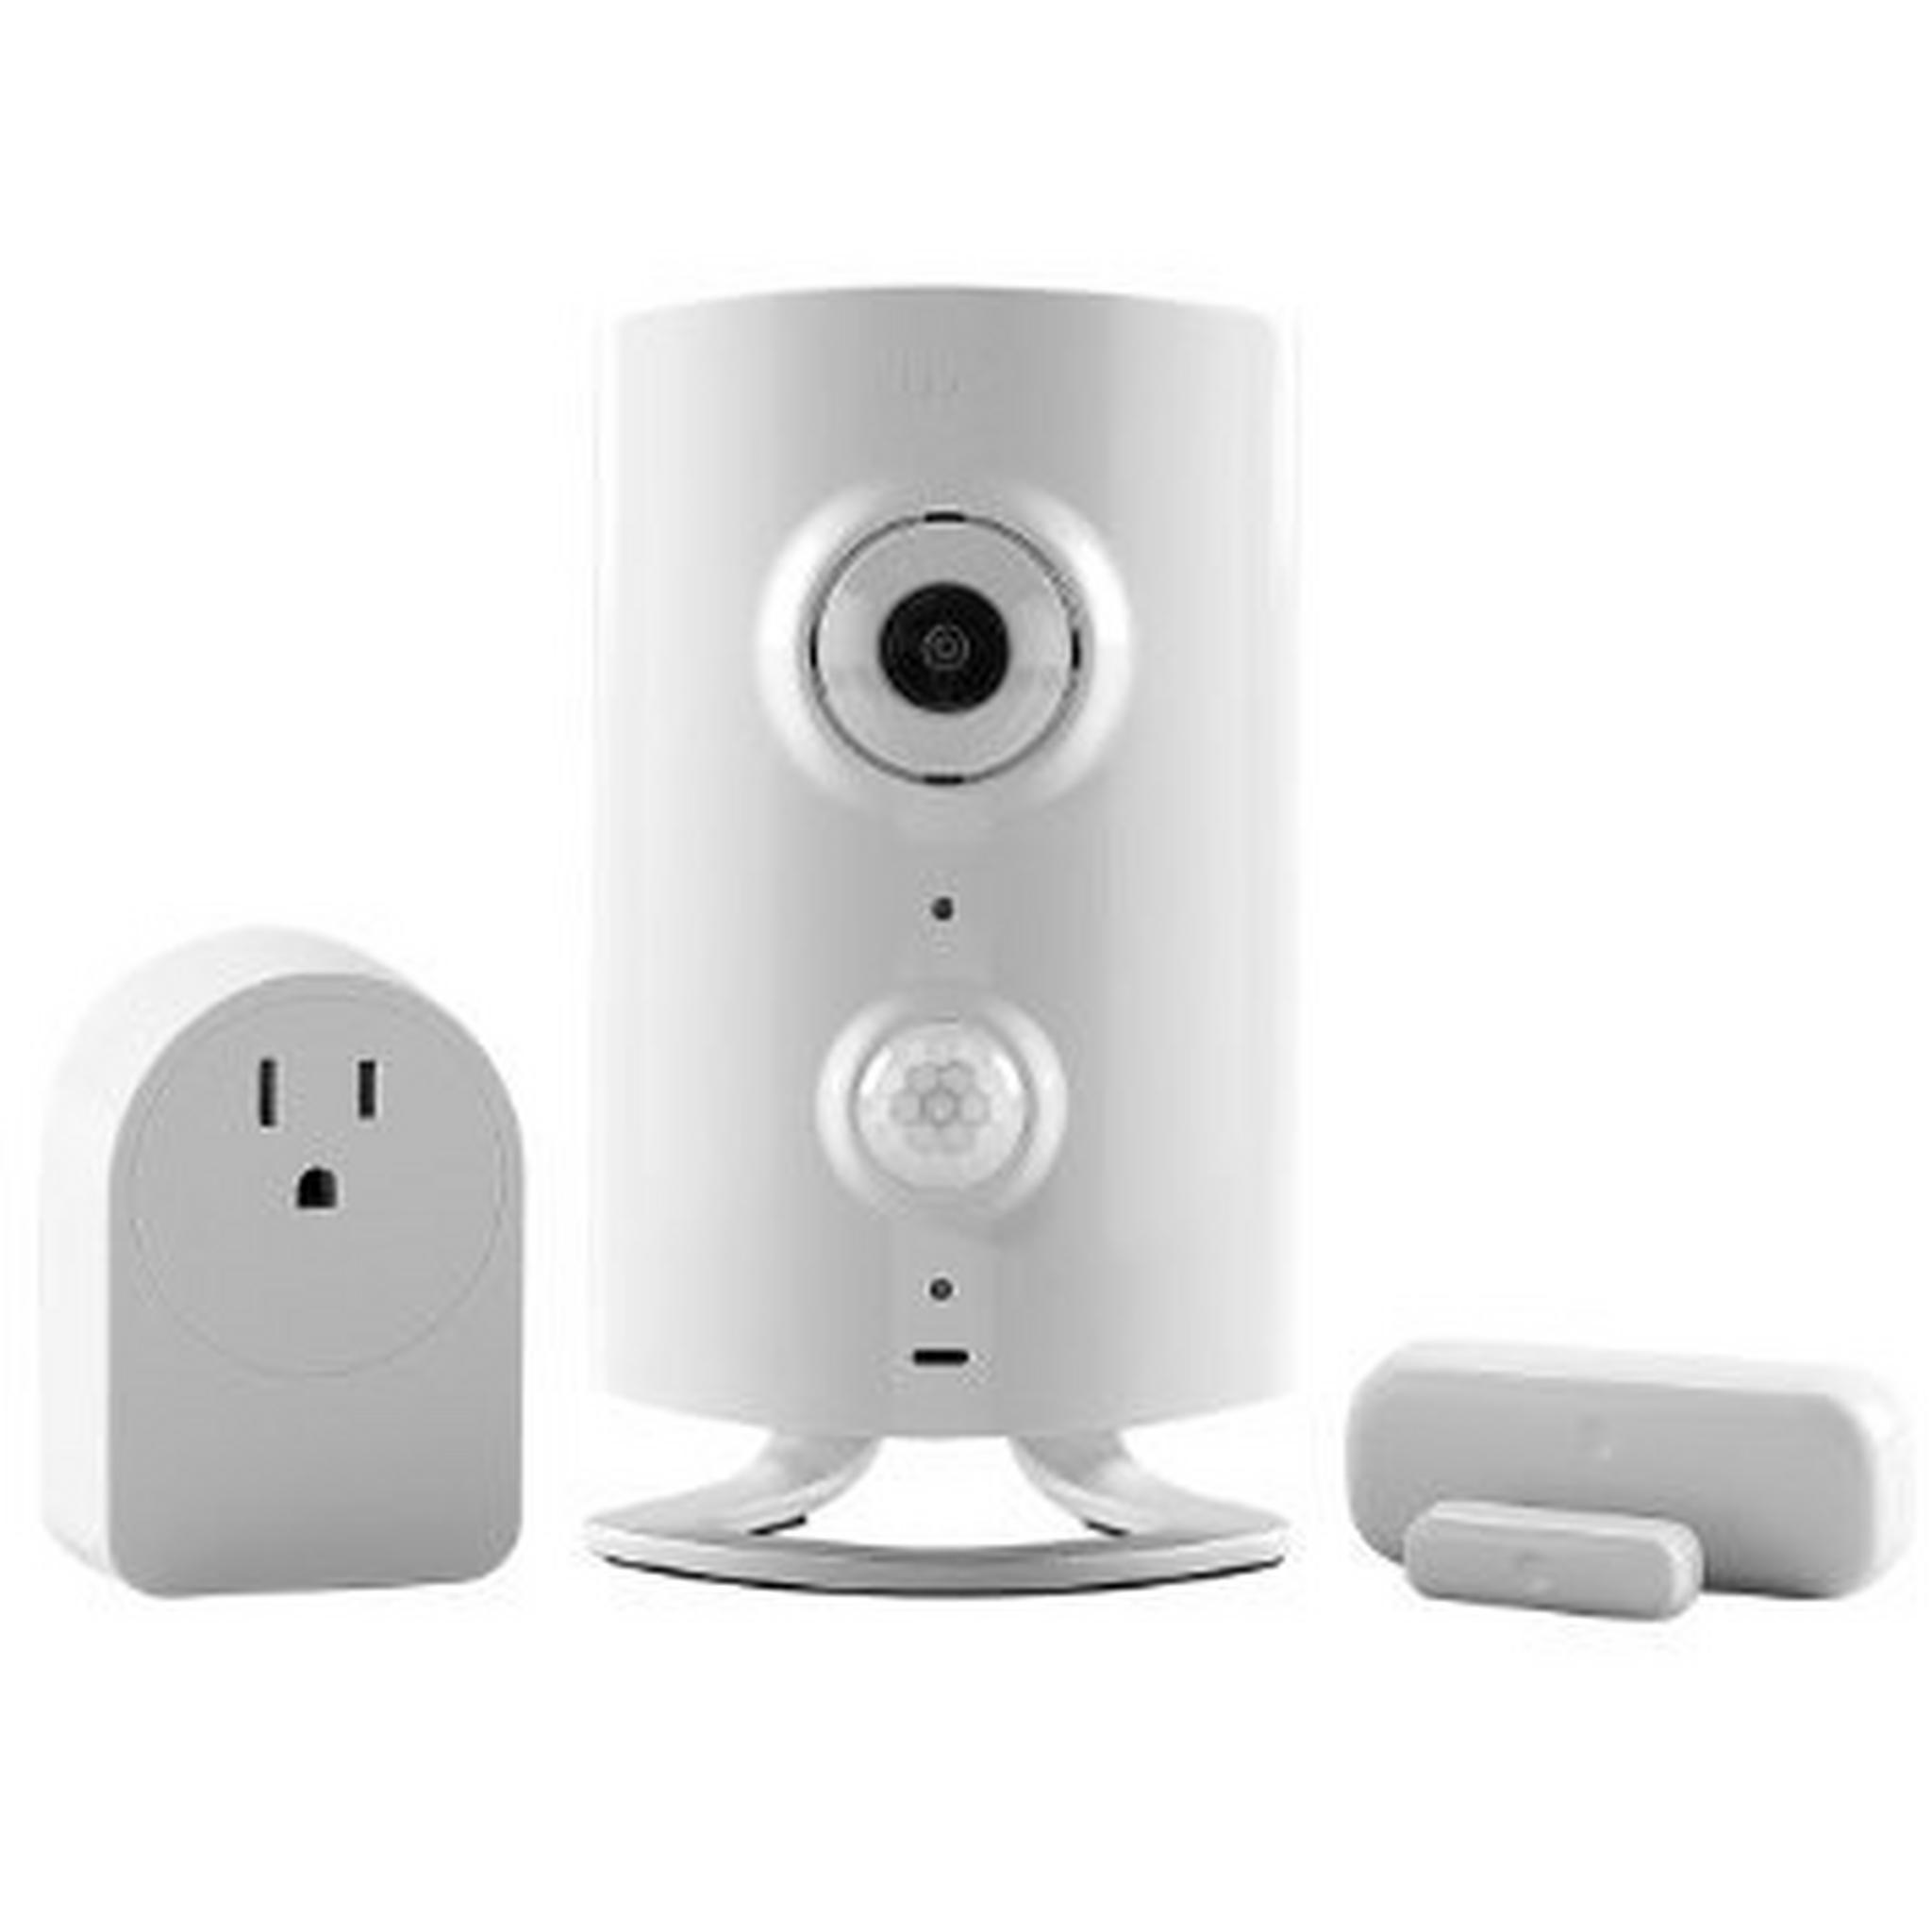 Piper classic - HD Security Camera Wireless Surveillance System (P1.0-NA-W)